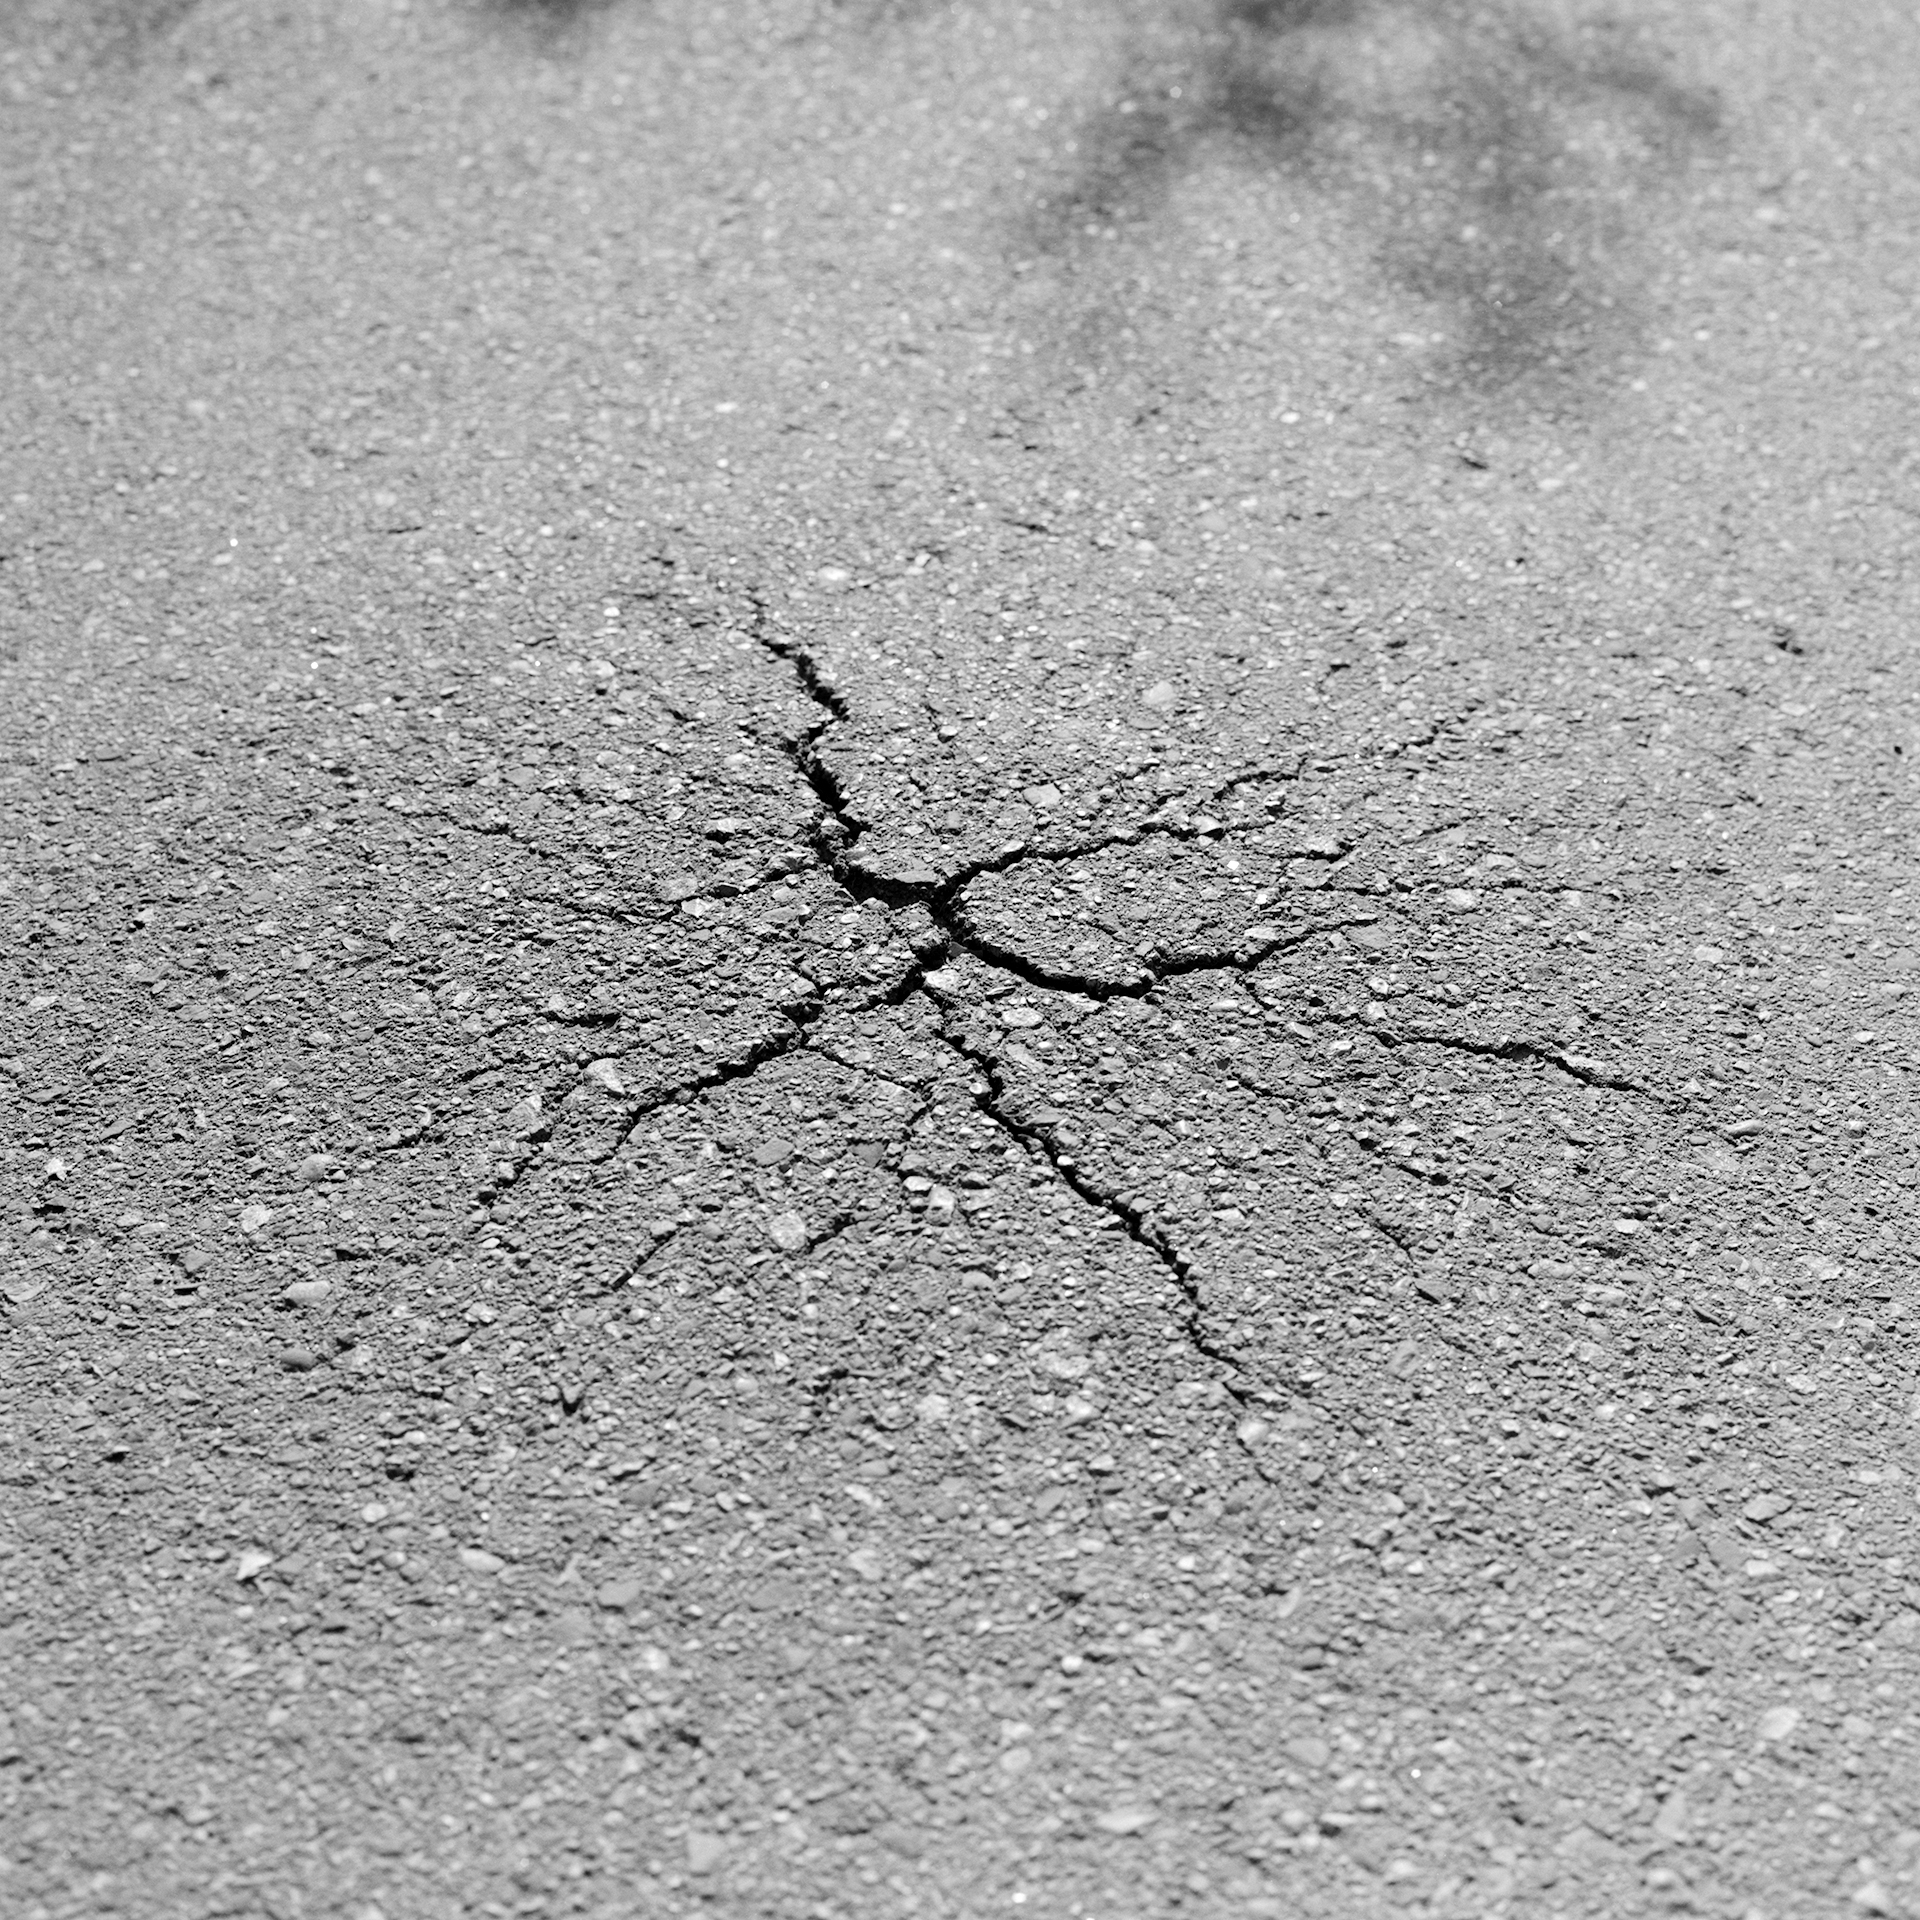 Where The River Runs # 7: A square black and white photograph of a web-like crack in the pavement. The shadow of a tree can be seen in the top right corner, hanging overhead.